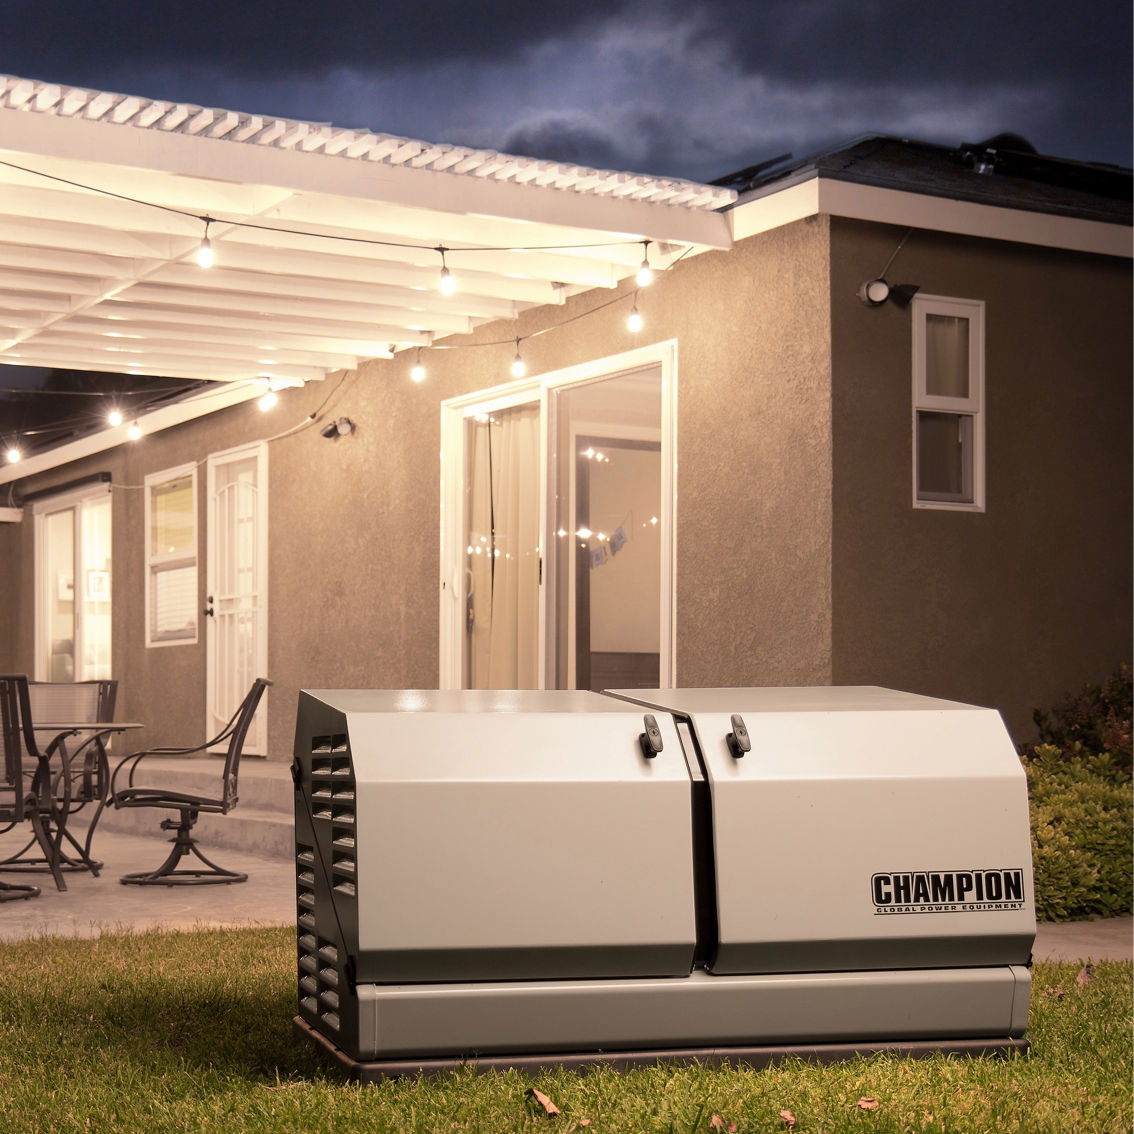 Champion 14kW aXis Home Standby Generator System with 200-Amp Auto Transfer Switch - Image 6 of 8